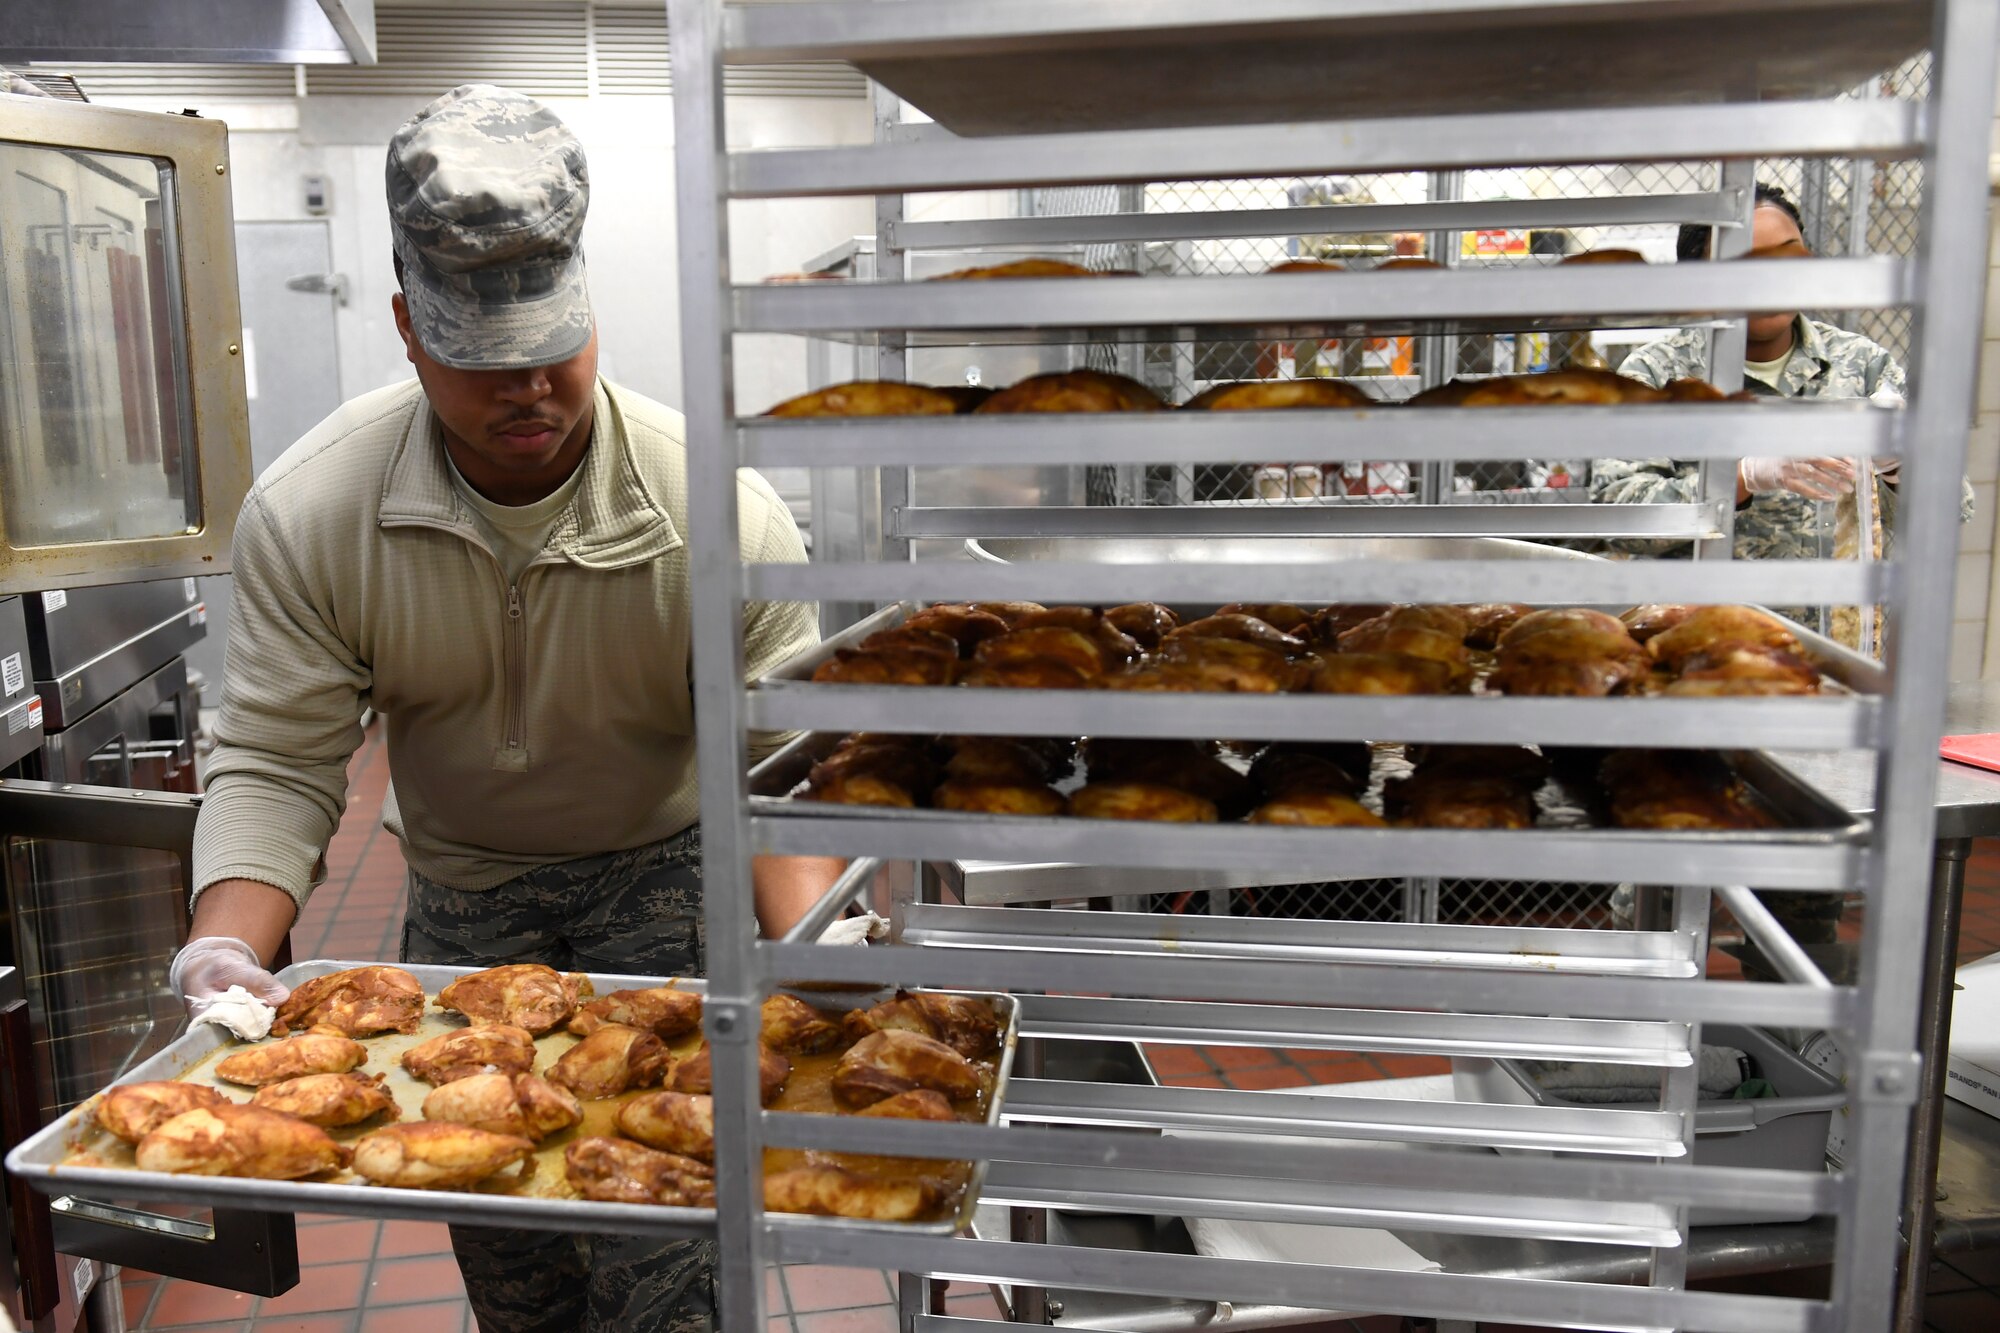 U.S. Air Force Senior Airman Deontre Barrett, 145th Force Support Squadron, places a pan of cooked chicken on a rack for lunch in the dining facility during drill weekend at the North Carolina Air National Guard Base, Charlotte Douglas International Airport, Jan. 12, 2019. Food services Airmen from the North Carolina Air National Guard train members from the Niagara Falls Air Reserve Station, New York, on full-service kitchen operations in preparation for the upcoming Air Force active duty and reserve Hennessy Award competition.